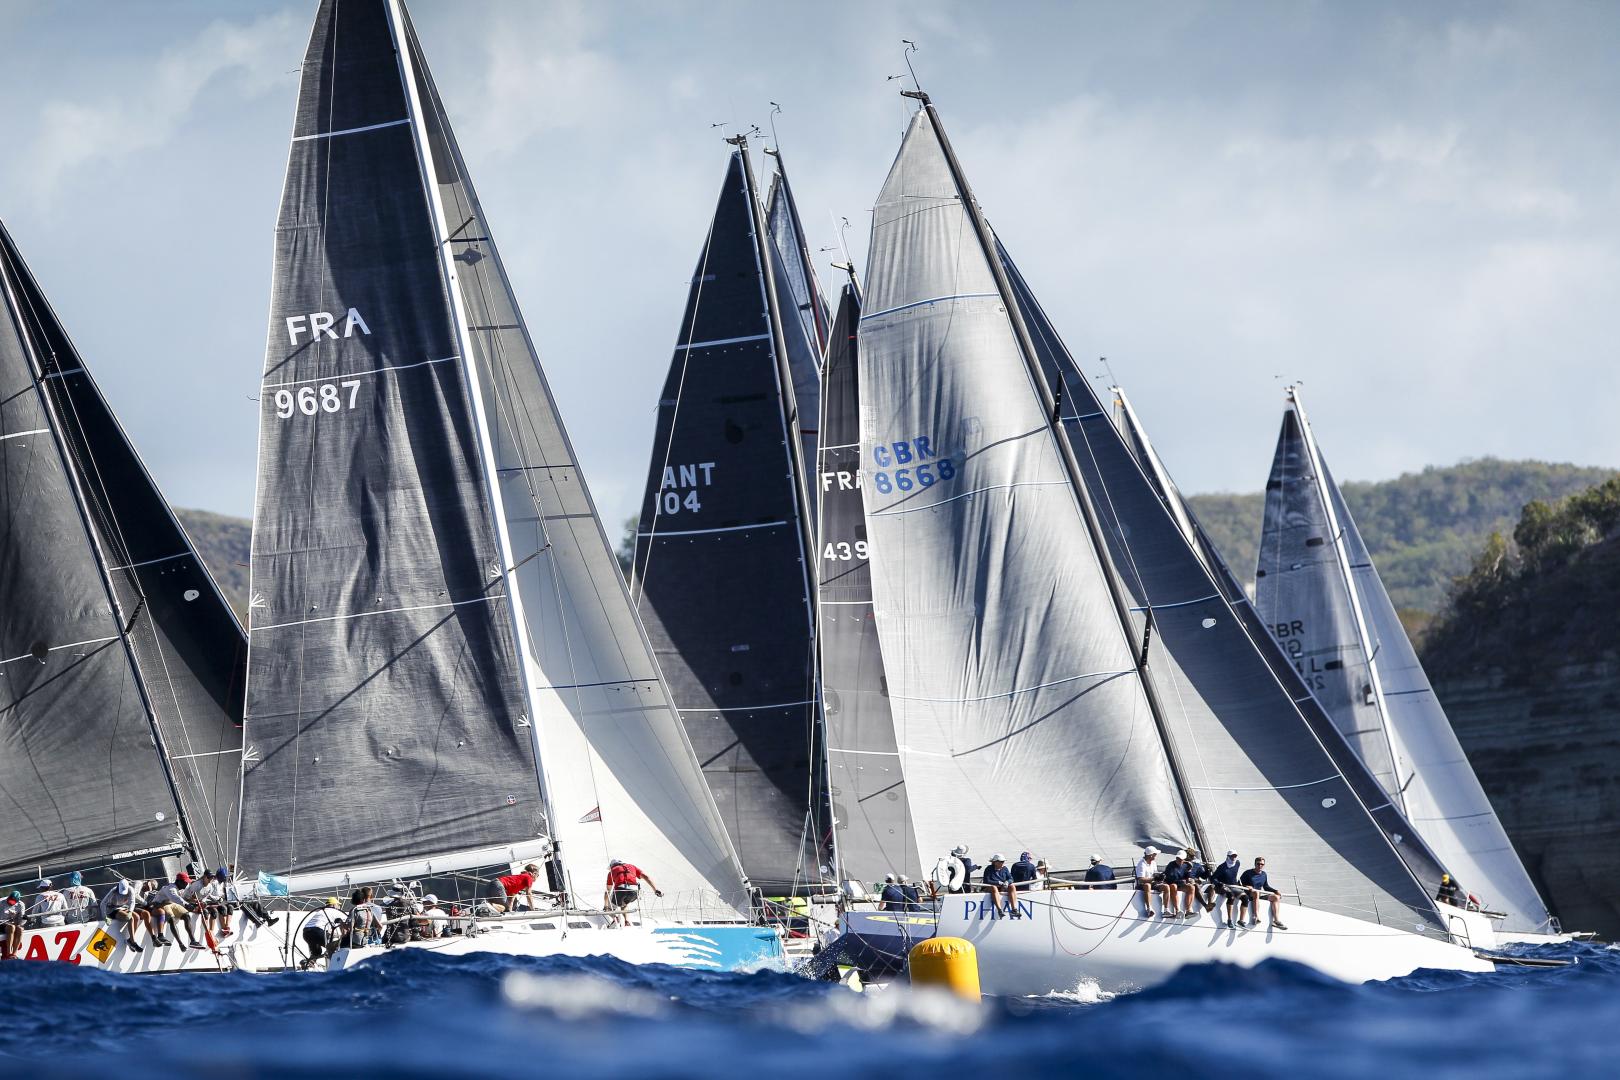 Antigua Sailing Week announces cancellation of 2021 event